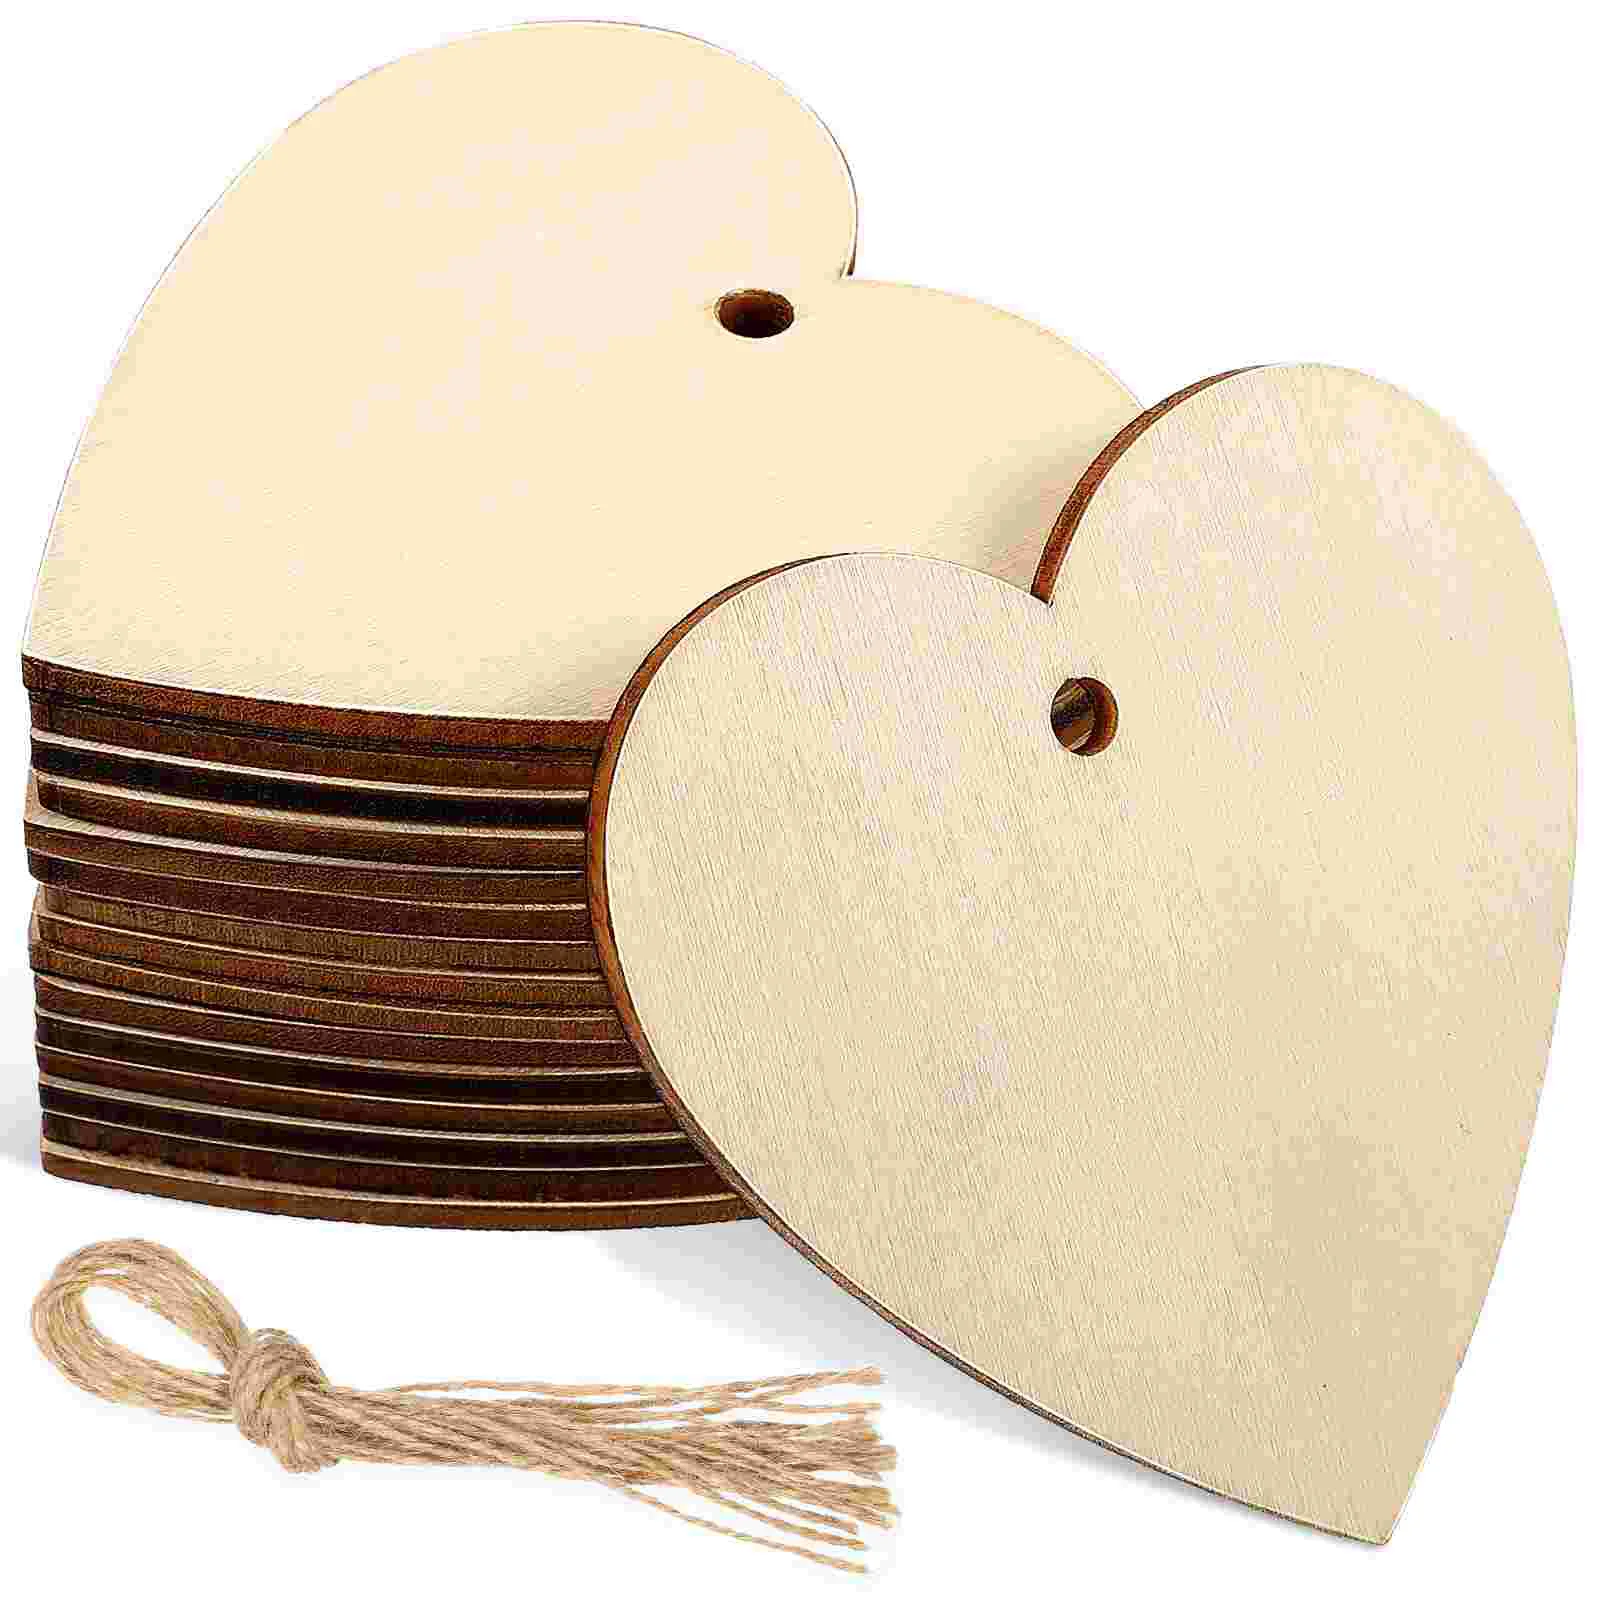 

Heart Wood Wooden Unfinished Crafts Ornaments Hearts Cutouts Pieces Slicespendant Hug Pocket Blank Wedding Slice Tags